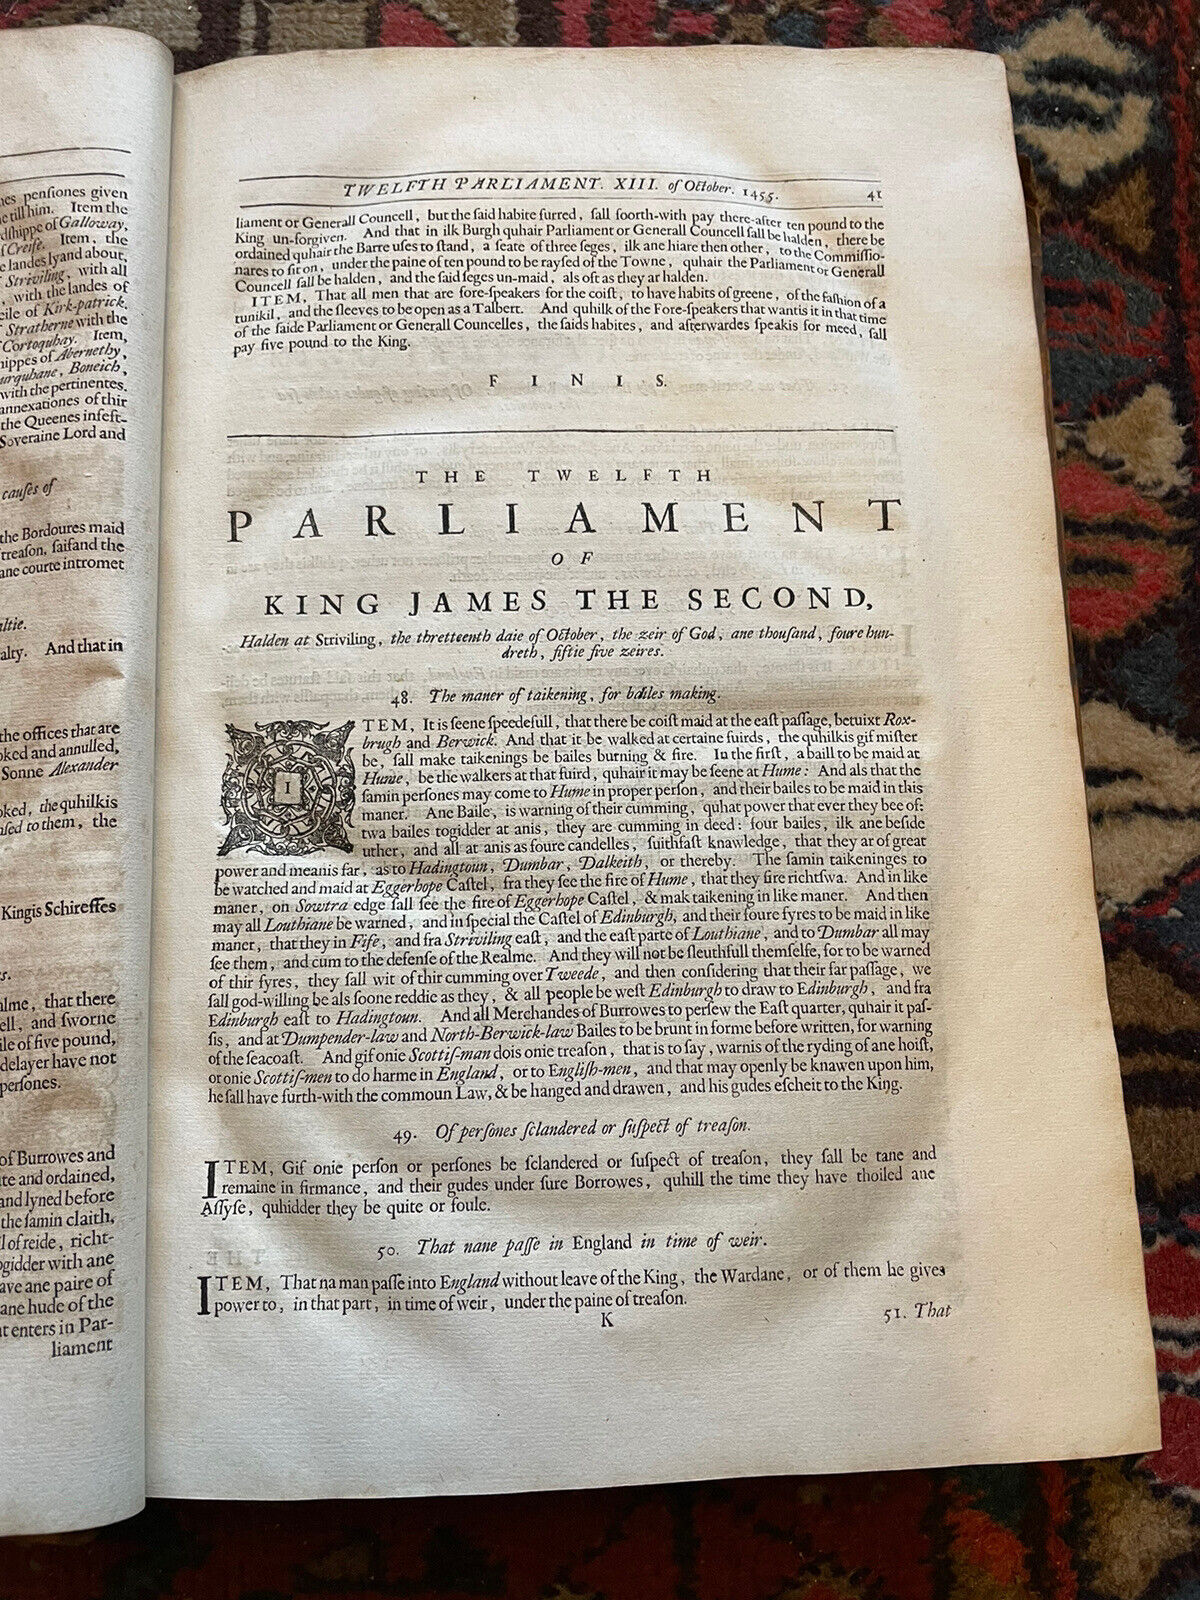 1681 LAWS and ACTS of PARLIAMENT : King James SCOTLAND Folio